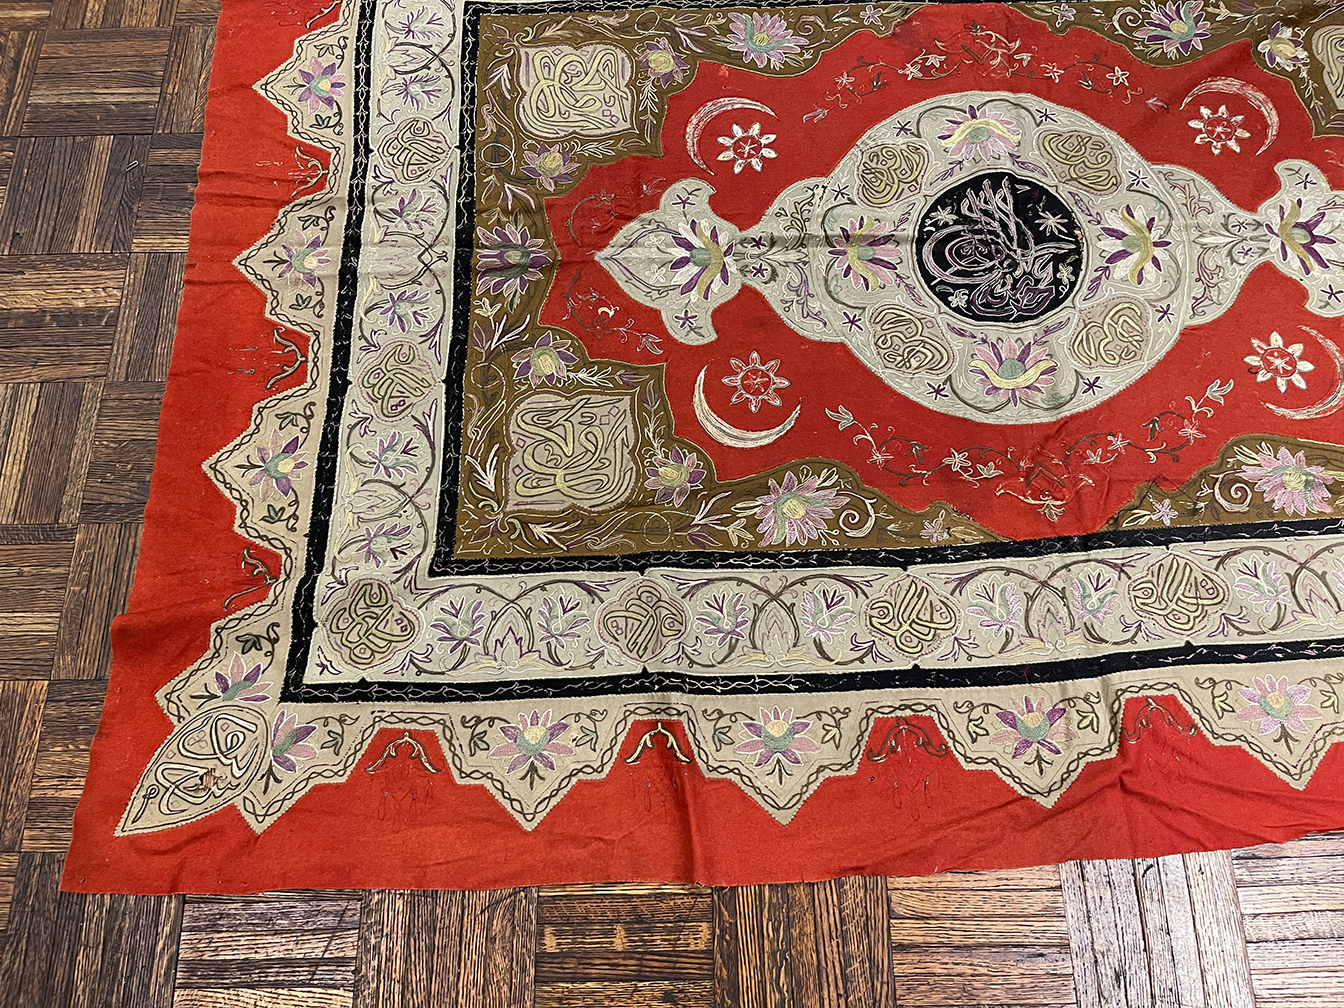 Antique embroidery Rug - # 55910